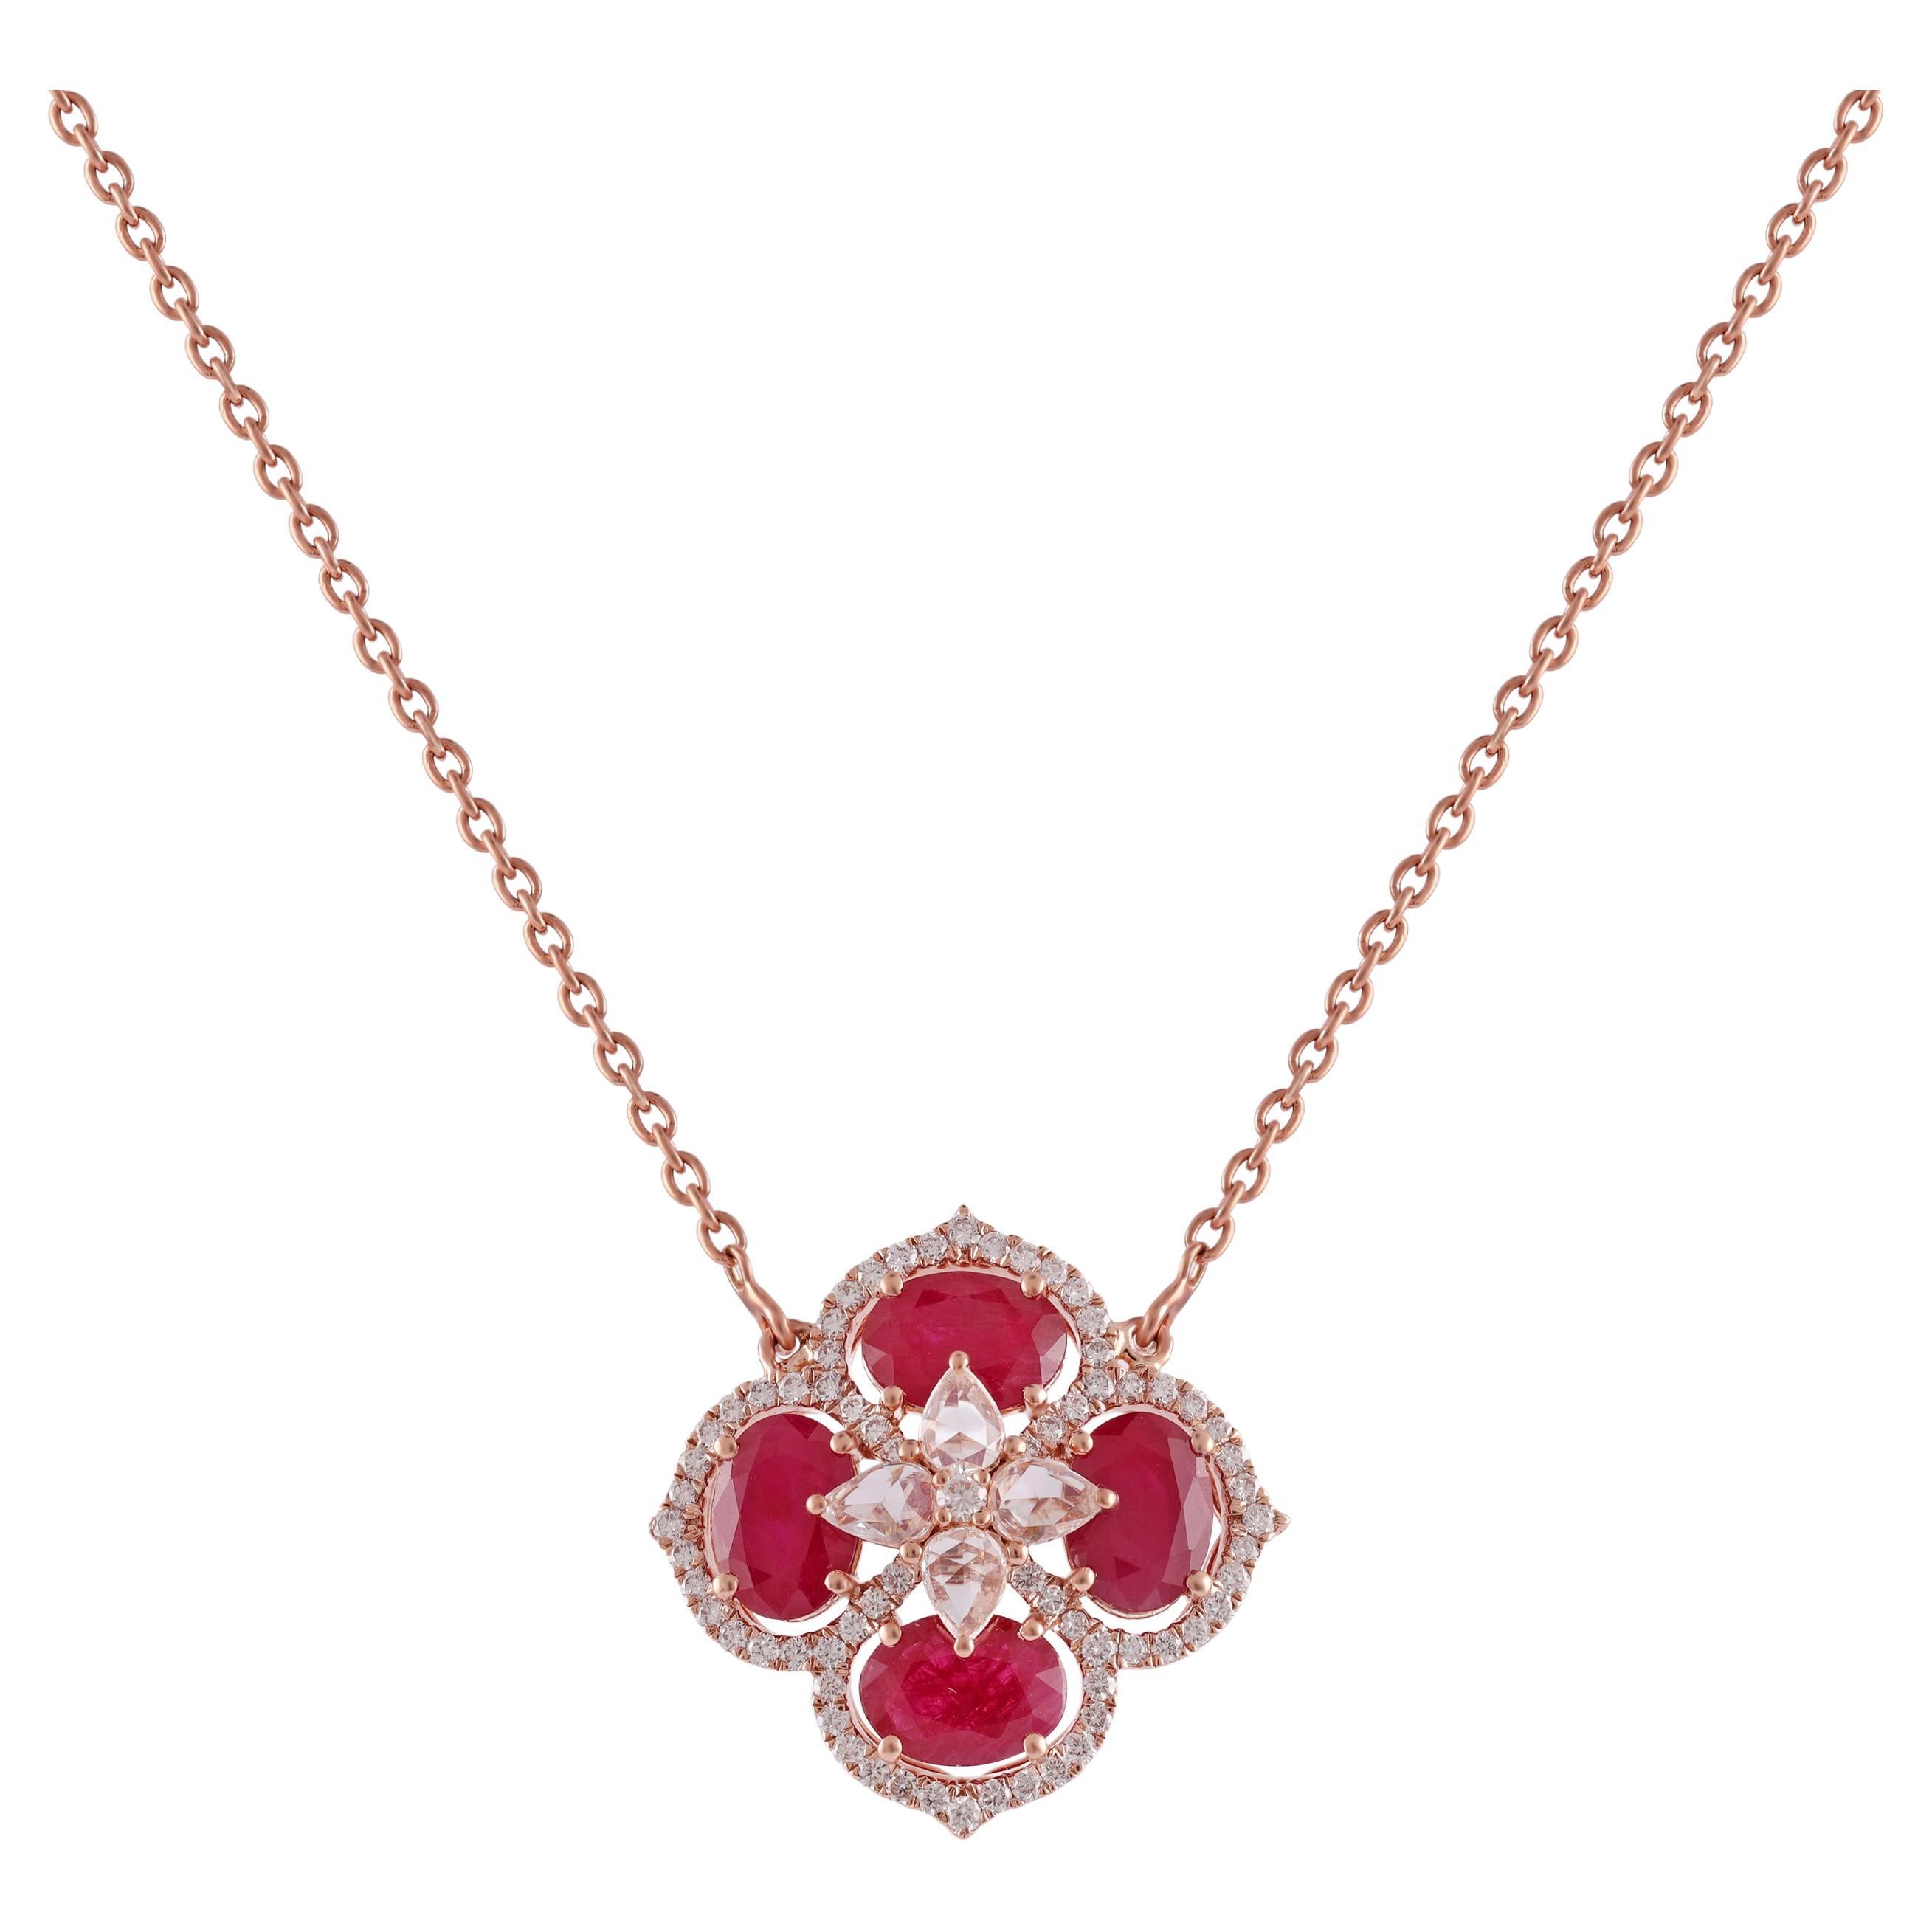  Oval Cut Ruby Pendant Necklace in 18 Karat Gold with Diamond